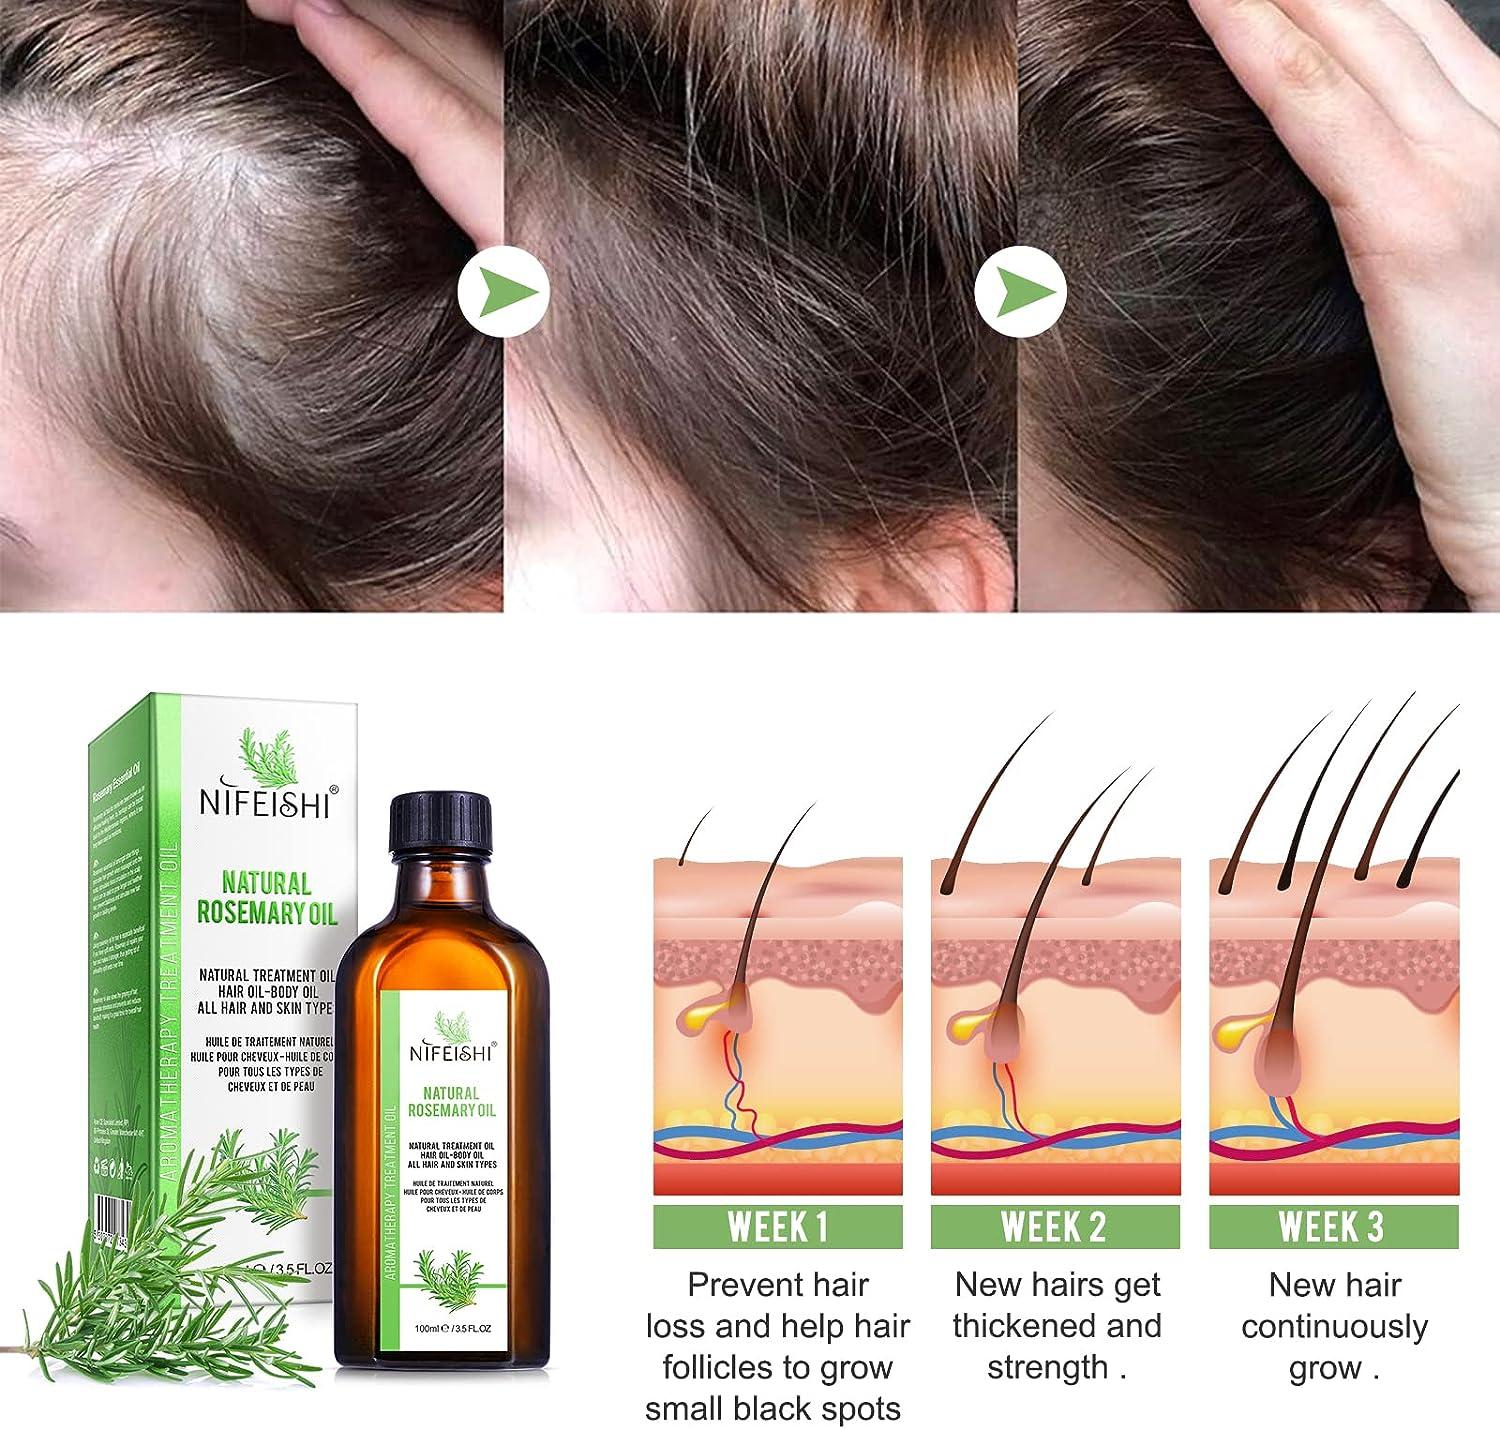 Rosemary Oil for Hair Growth & Skin Care (3.5 Oz) 100% Pure